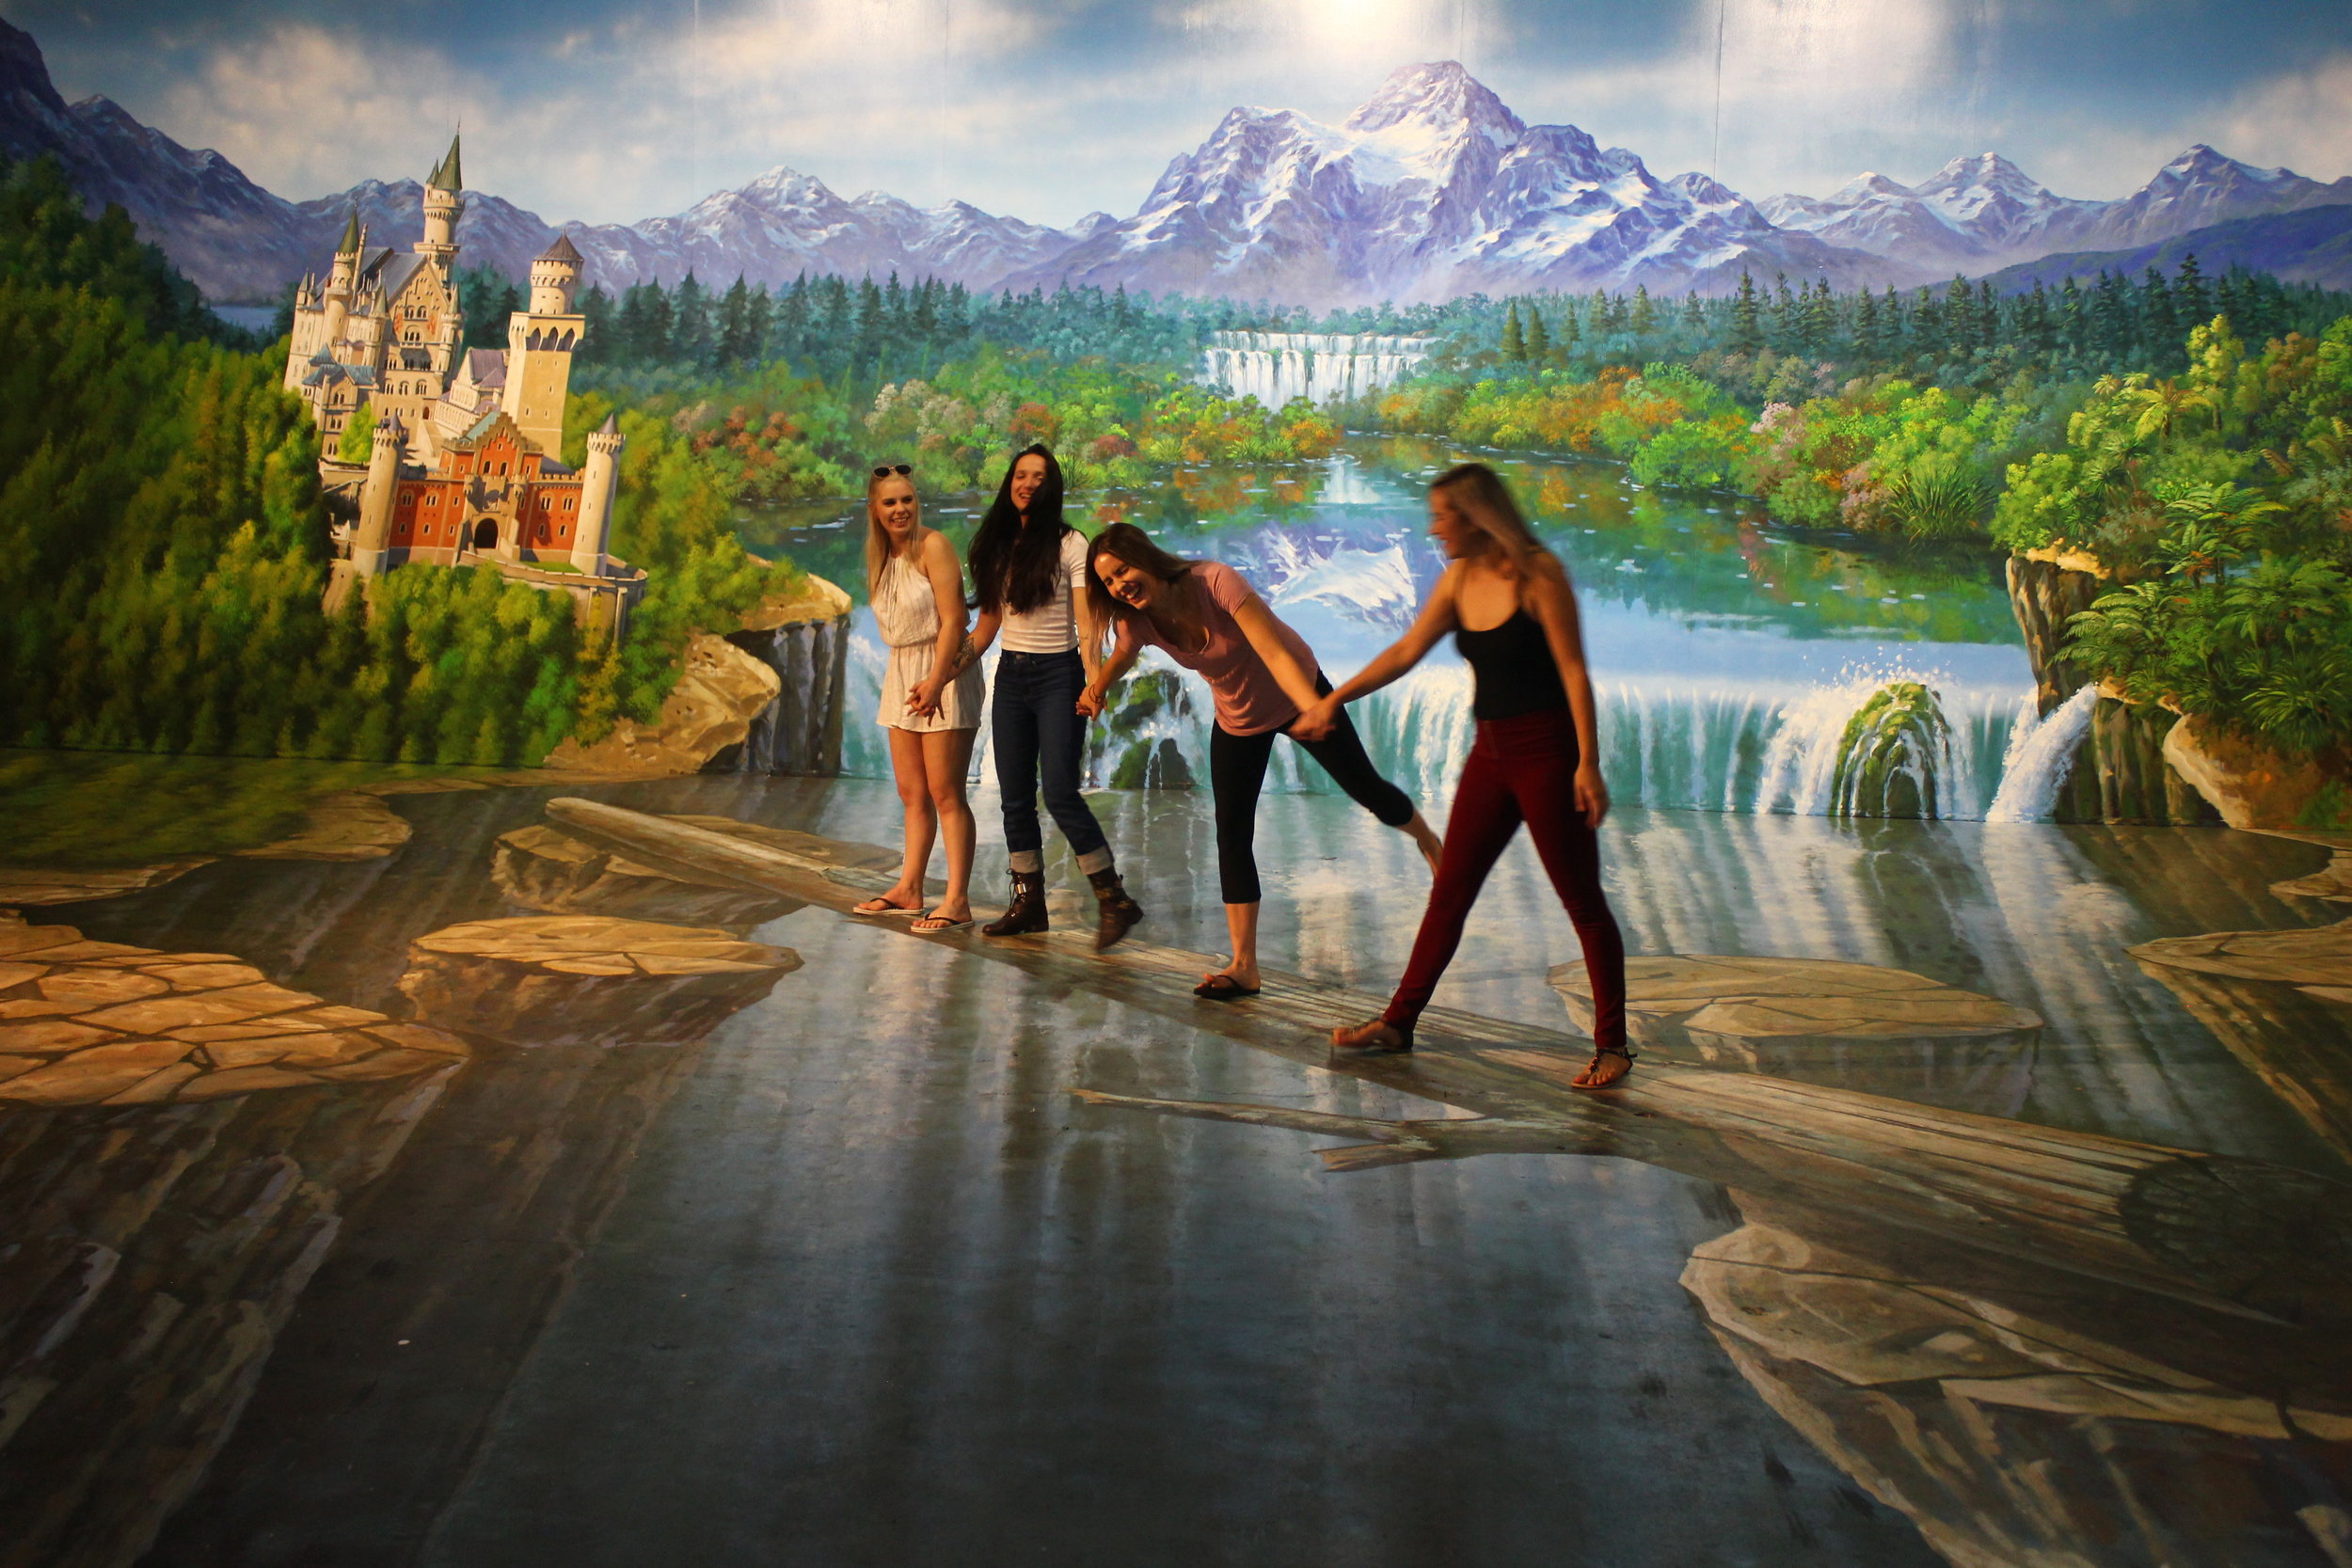 3D Trick Art Gallery in Rotorua - Cost, When to Visit, Tips and